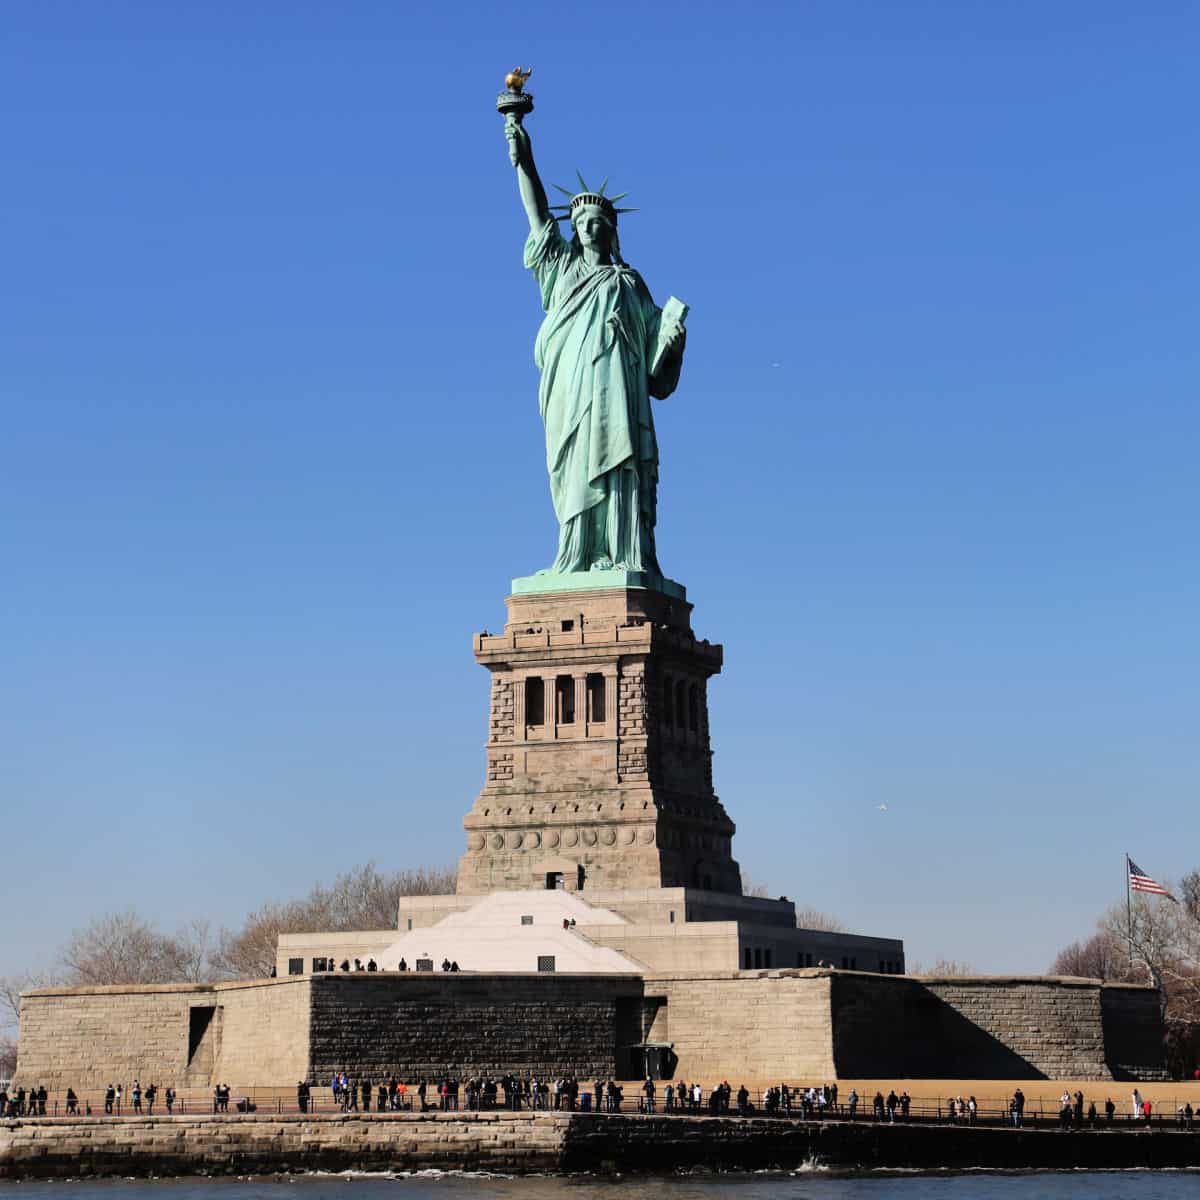 The Statue of Liberty is in New York on Liberty Island